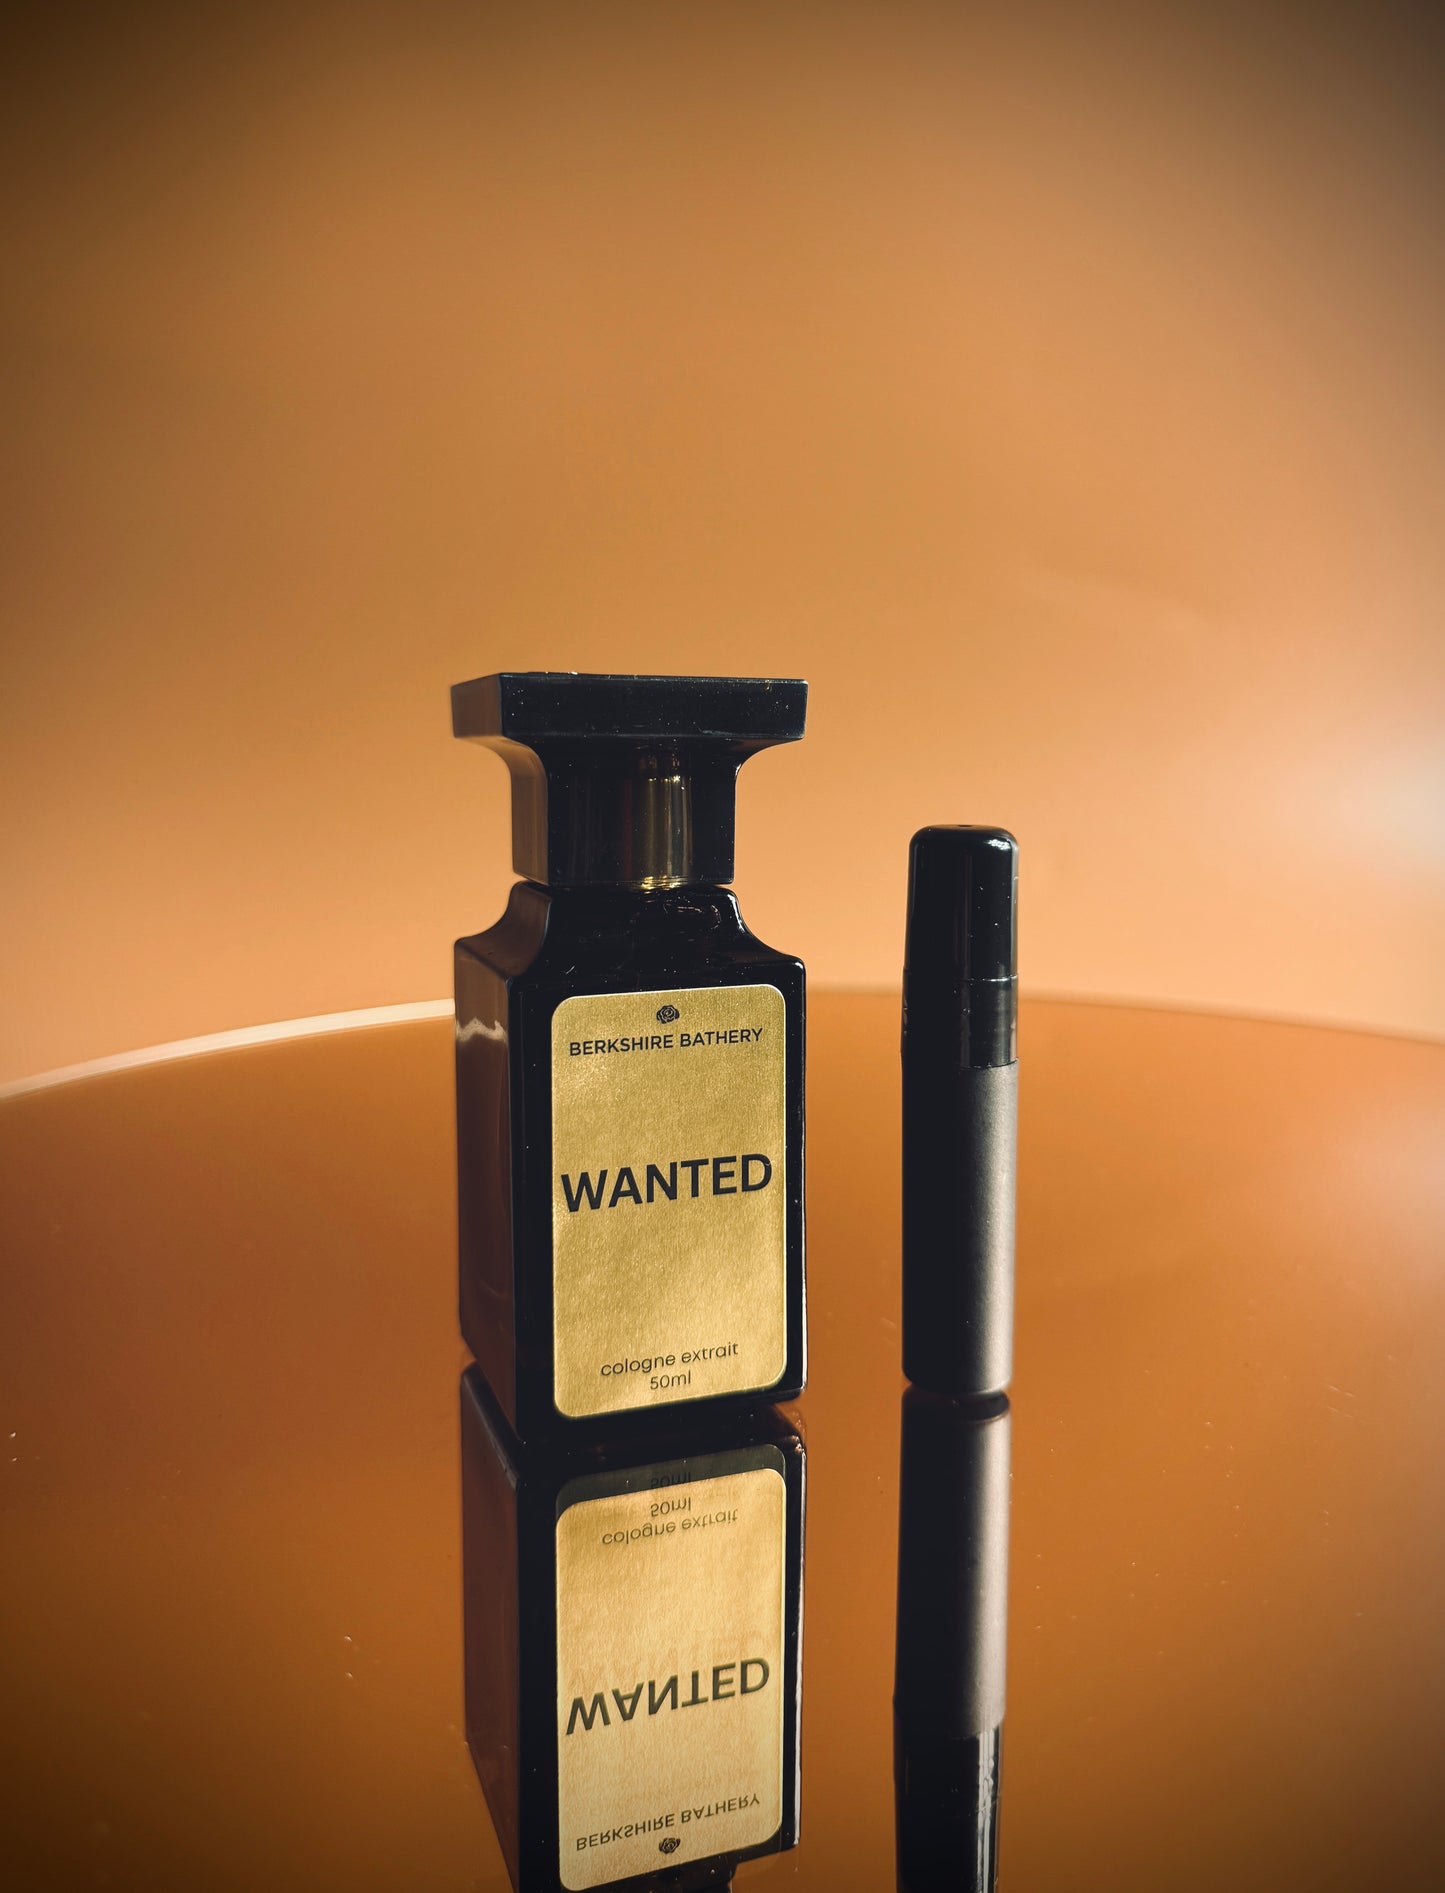 WANTED | Spicy + Citrus + Woody - 5ml Cologne Extrait Sample